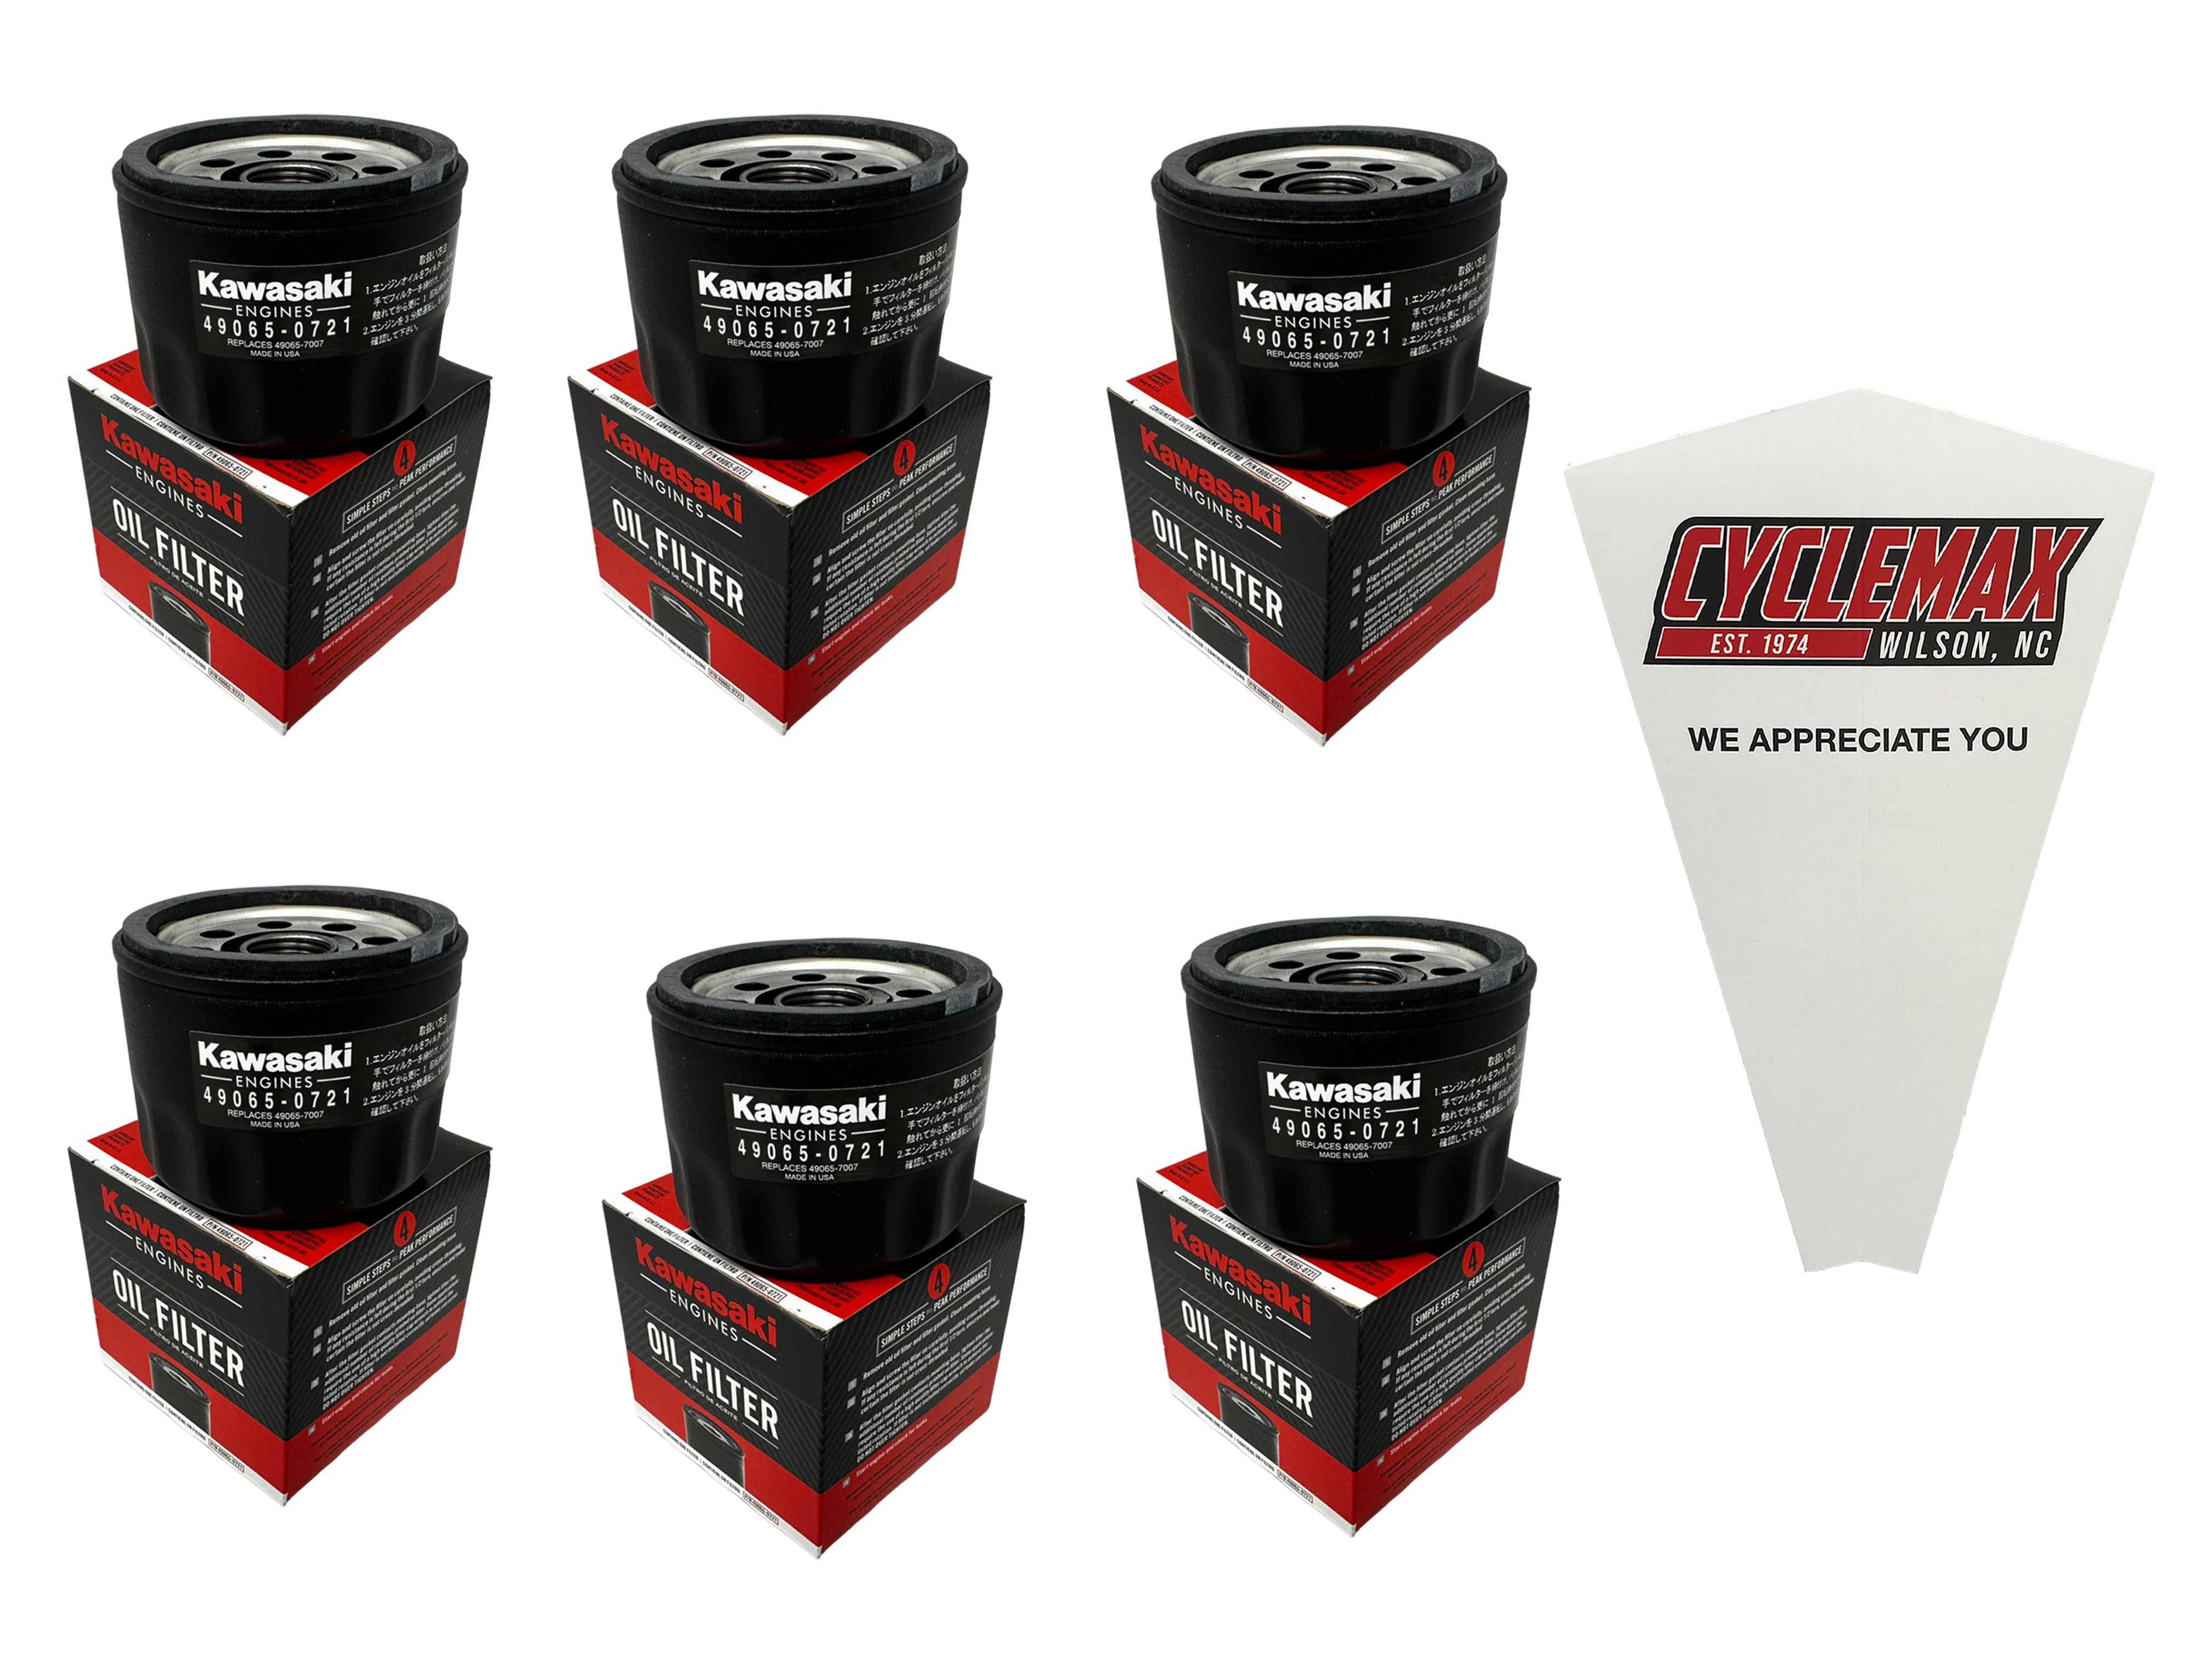 Cyclemax Six Pack for Kawasaki Oil Filter 49065-0721 Contains Six Filters and a Funnel